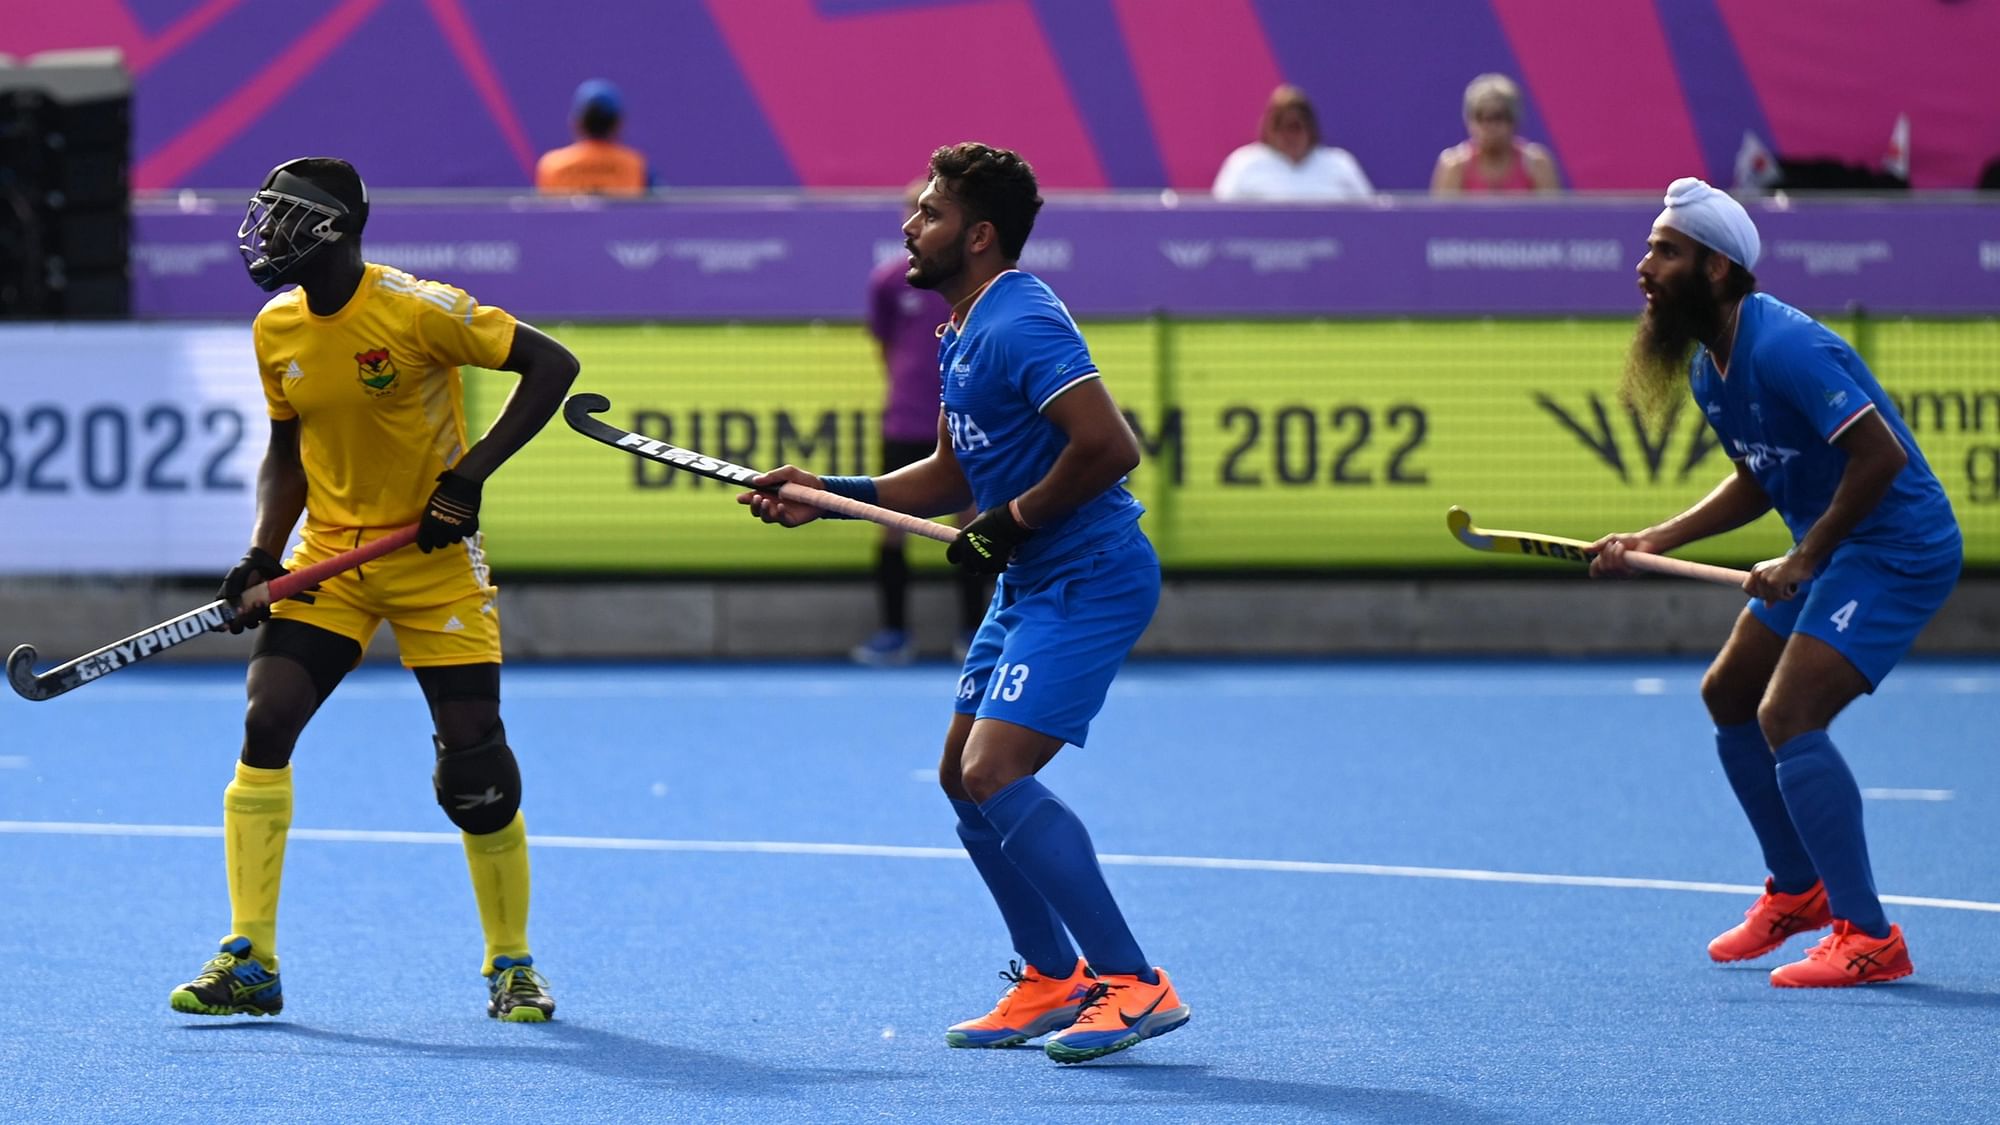 <div class="paragraphs"><p>Indian hockey player Harmanpreet Singh (centre) in action against Ghana during the Pool B men's field hockey match of the 2022 Commonwealth Games.&nbsp;</p></div>